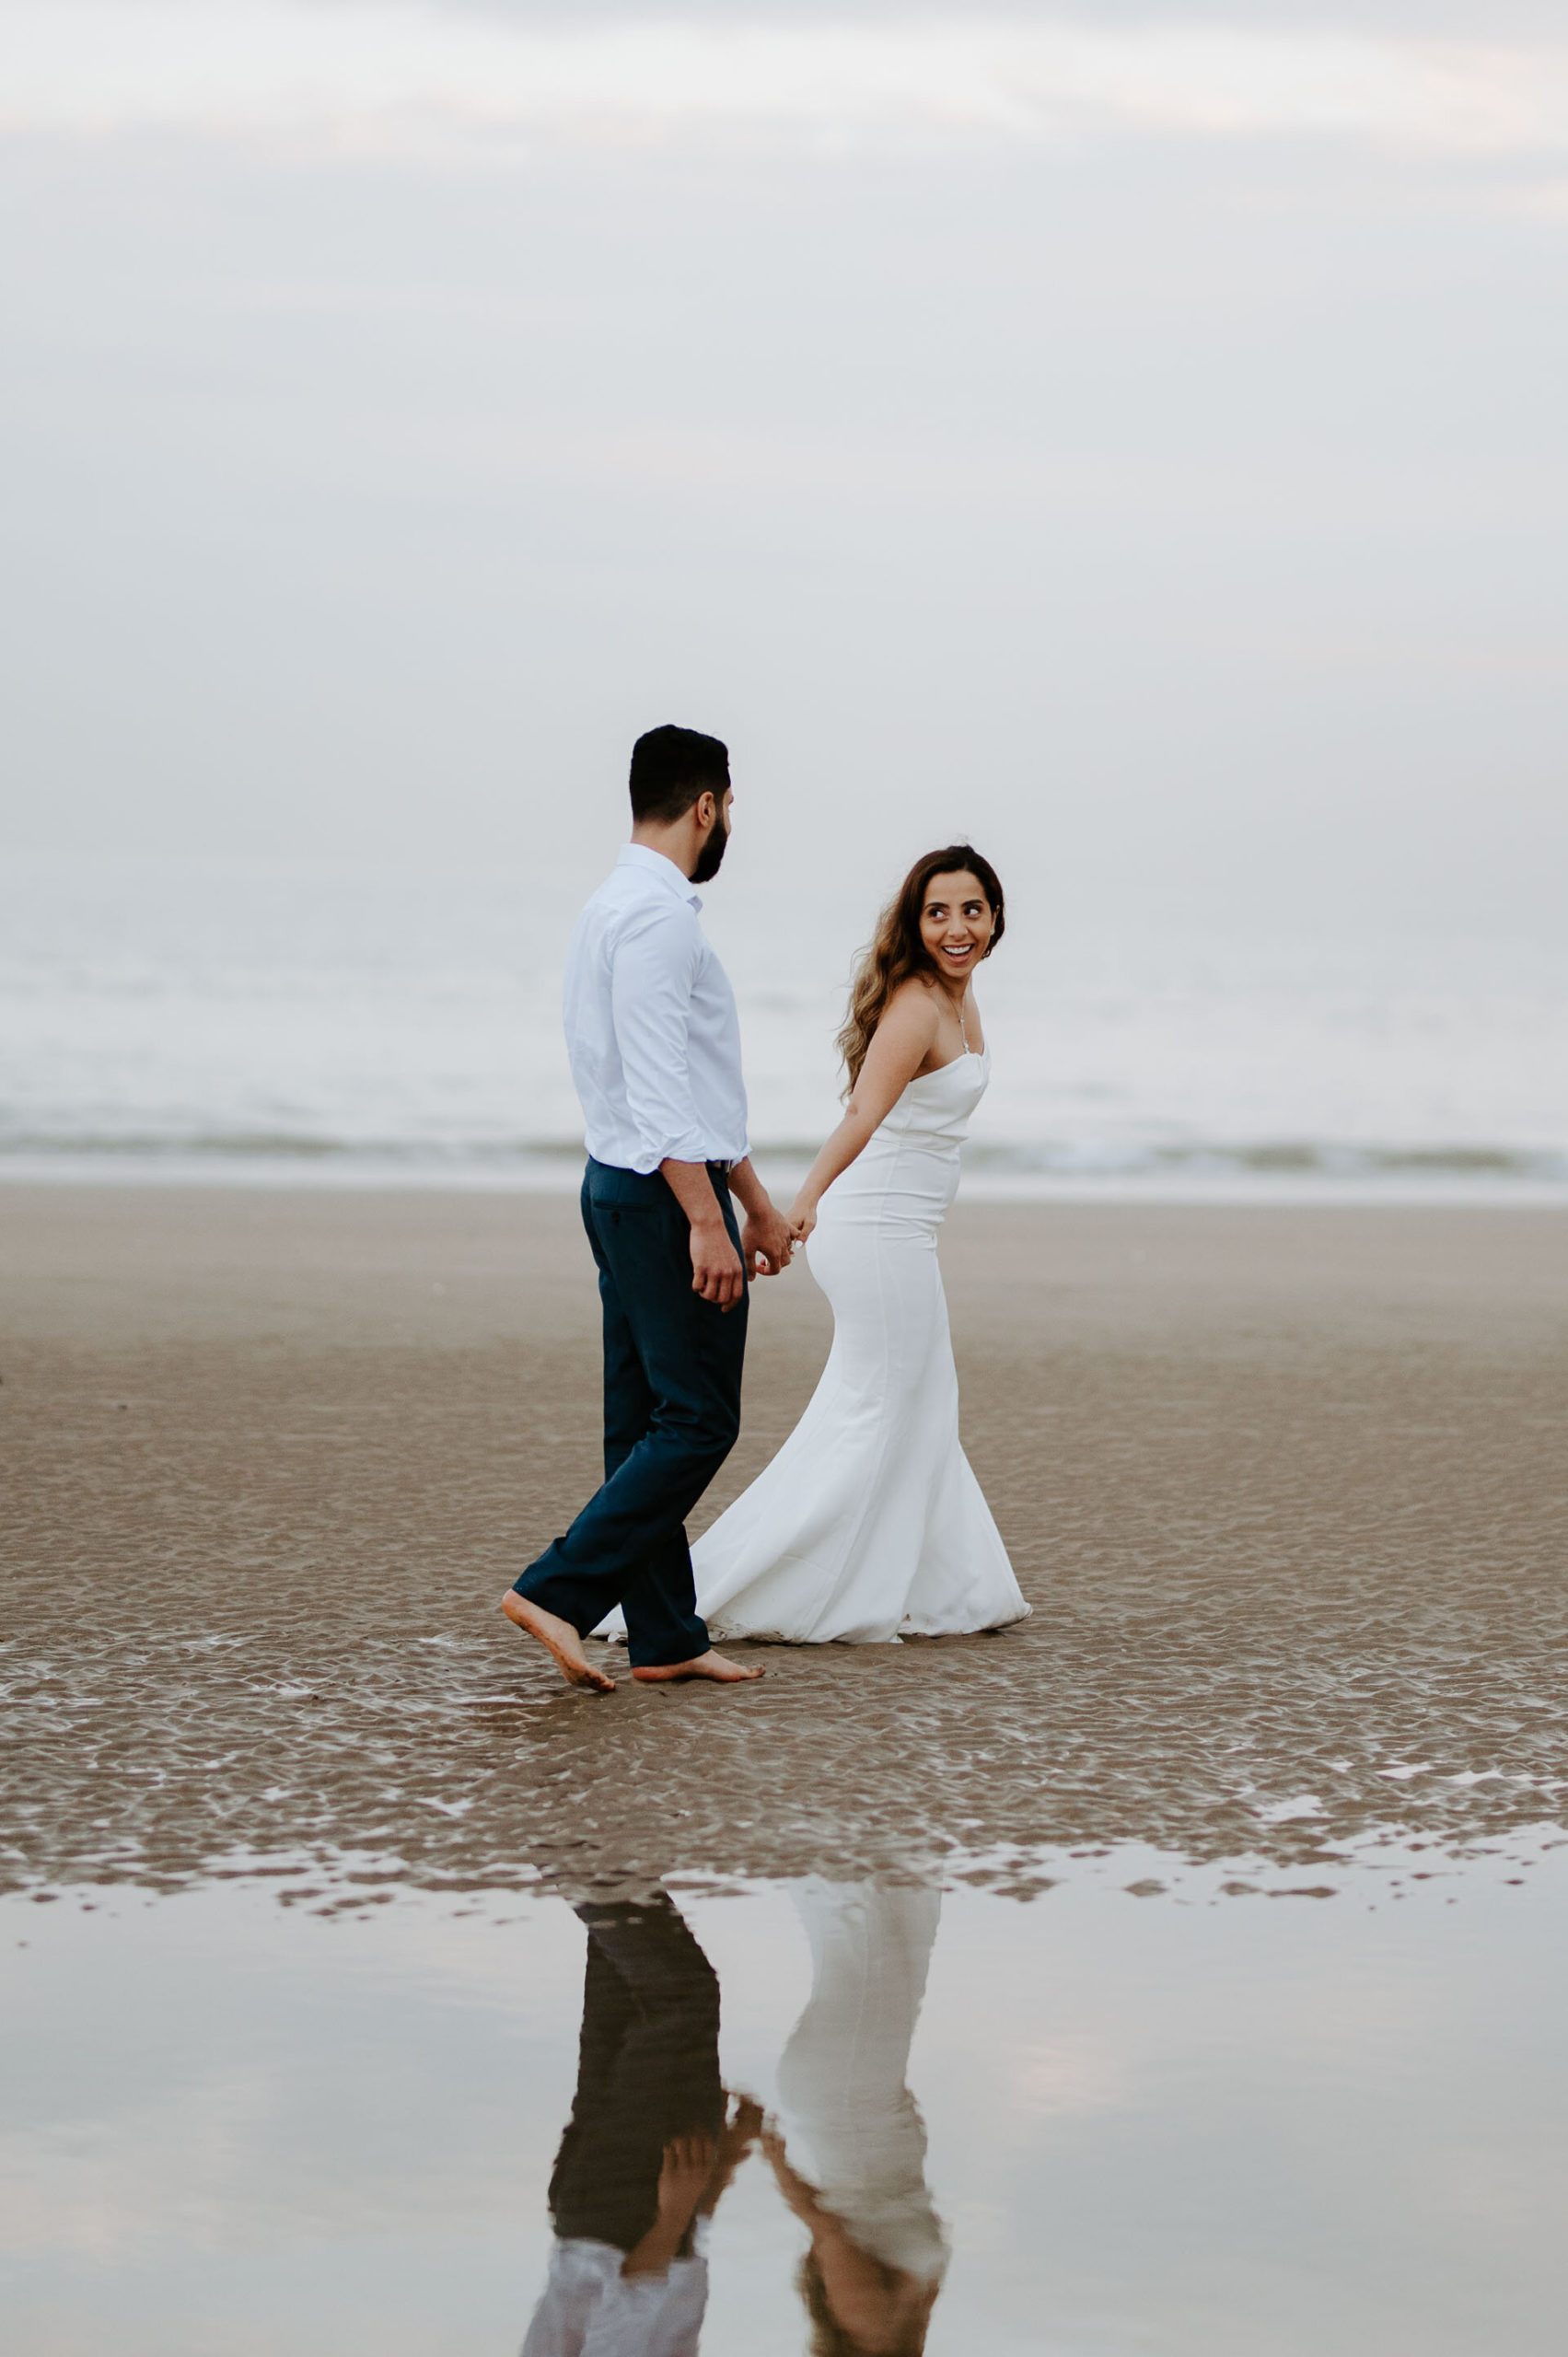 Demiana and Goergeuos - Camber Sands Golden Hour Beach Shoot - Laura Williams Photography-23.jpg